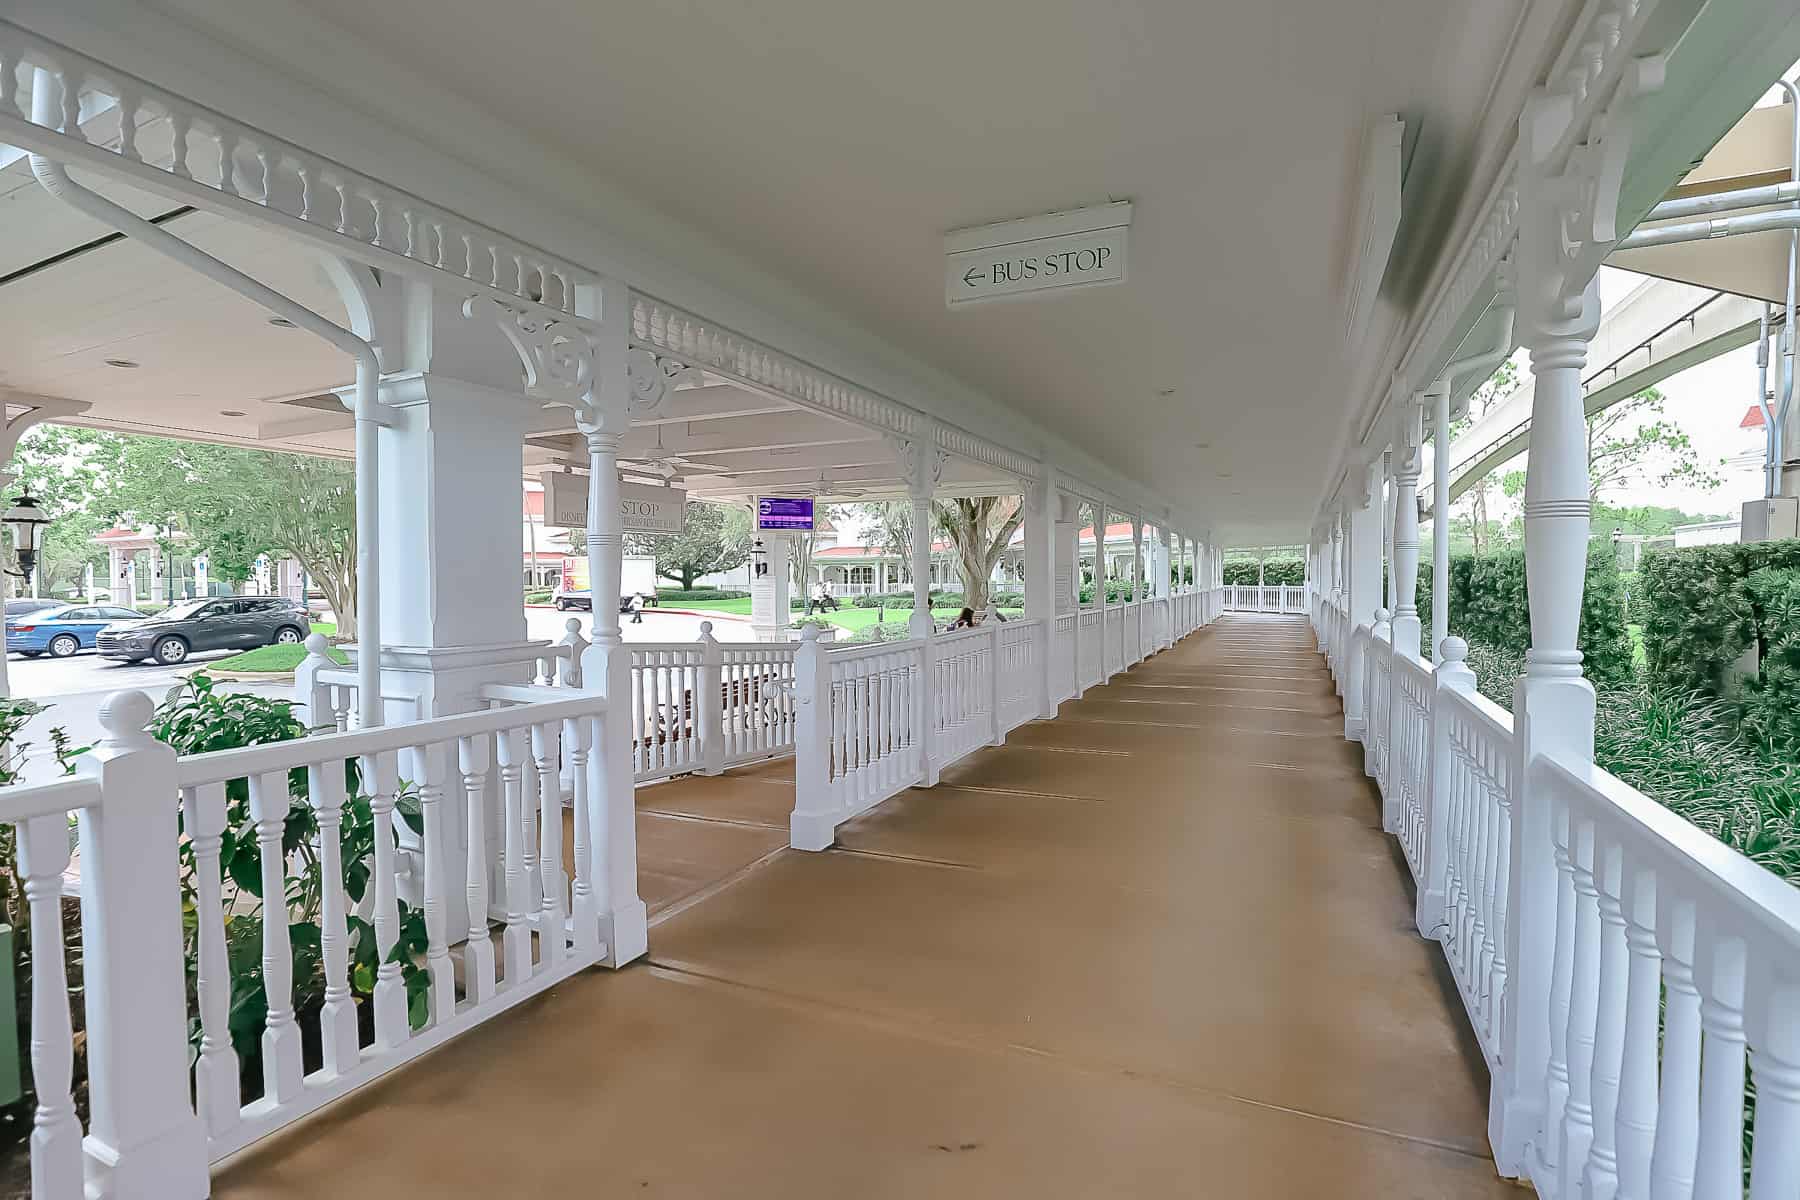 Grand Floridian to Disney Springs buses 